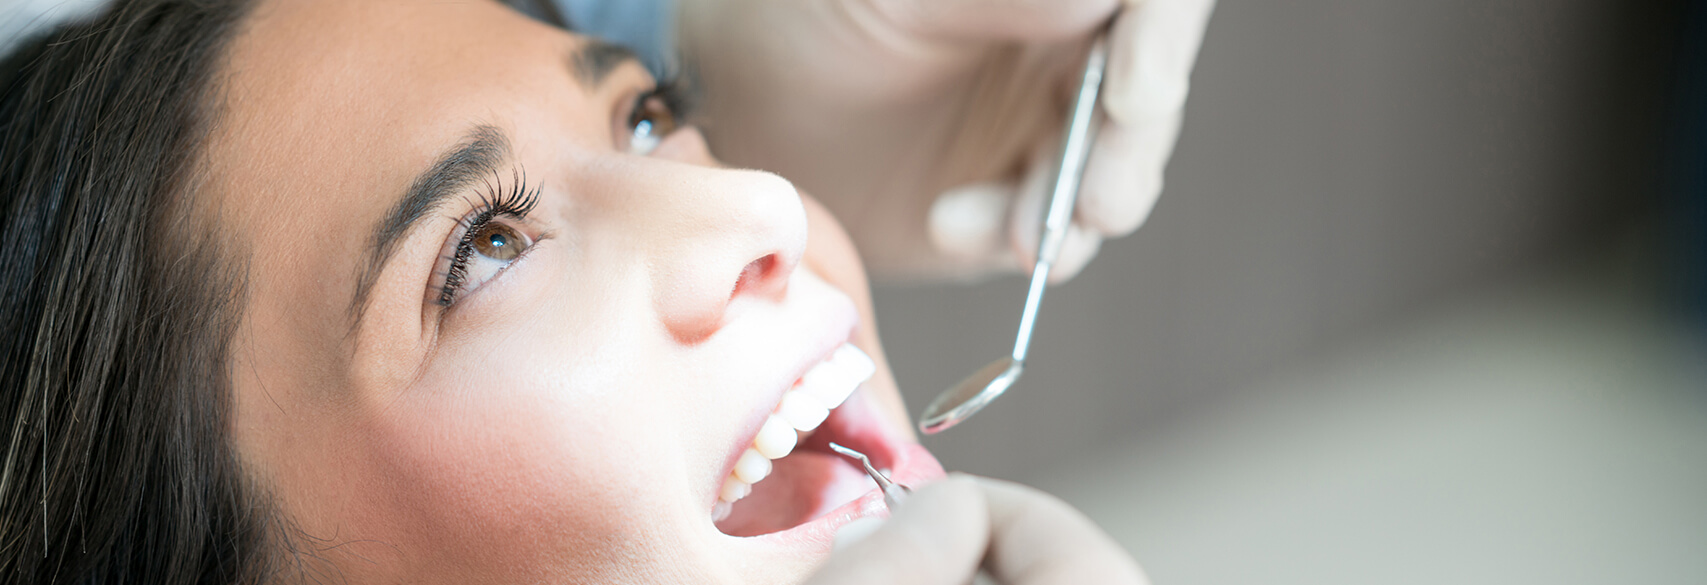 woman receiving a dental cleaning and exam